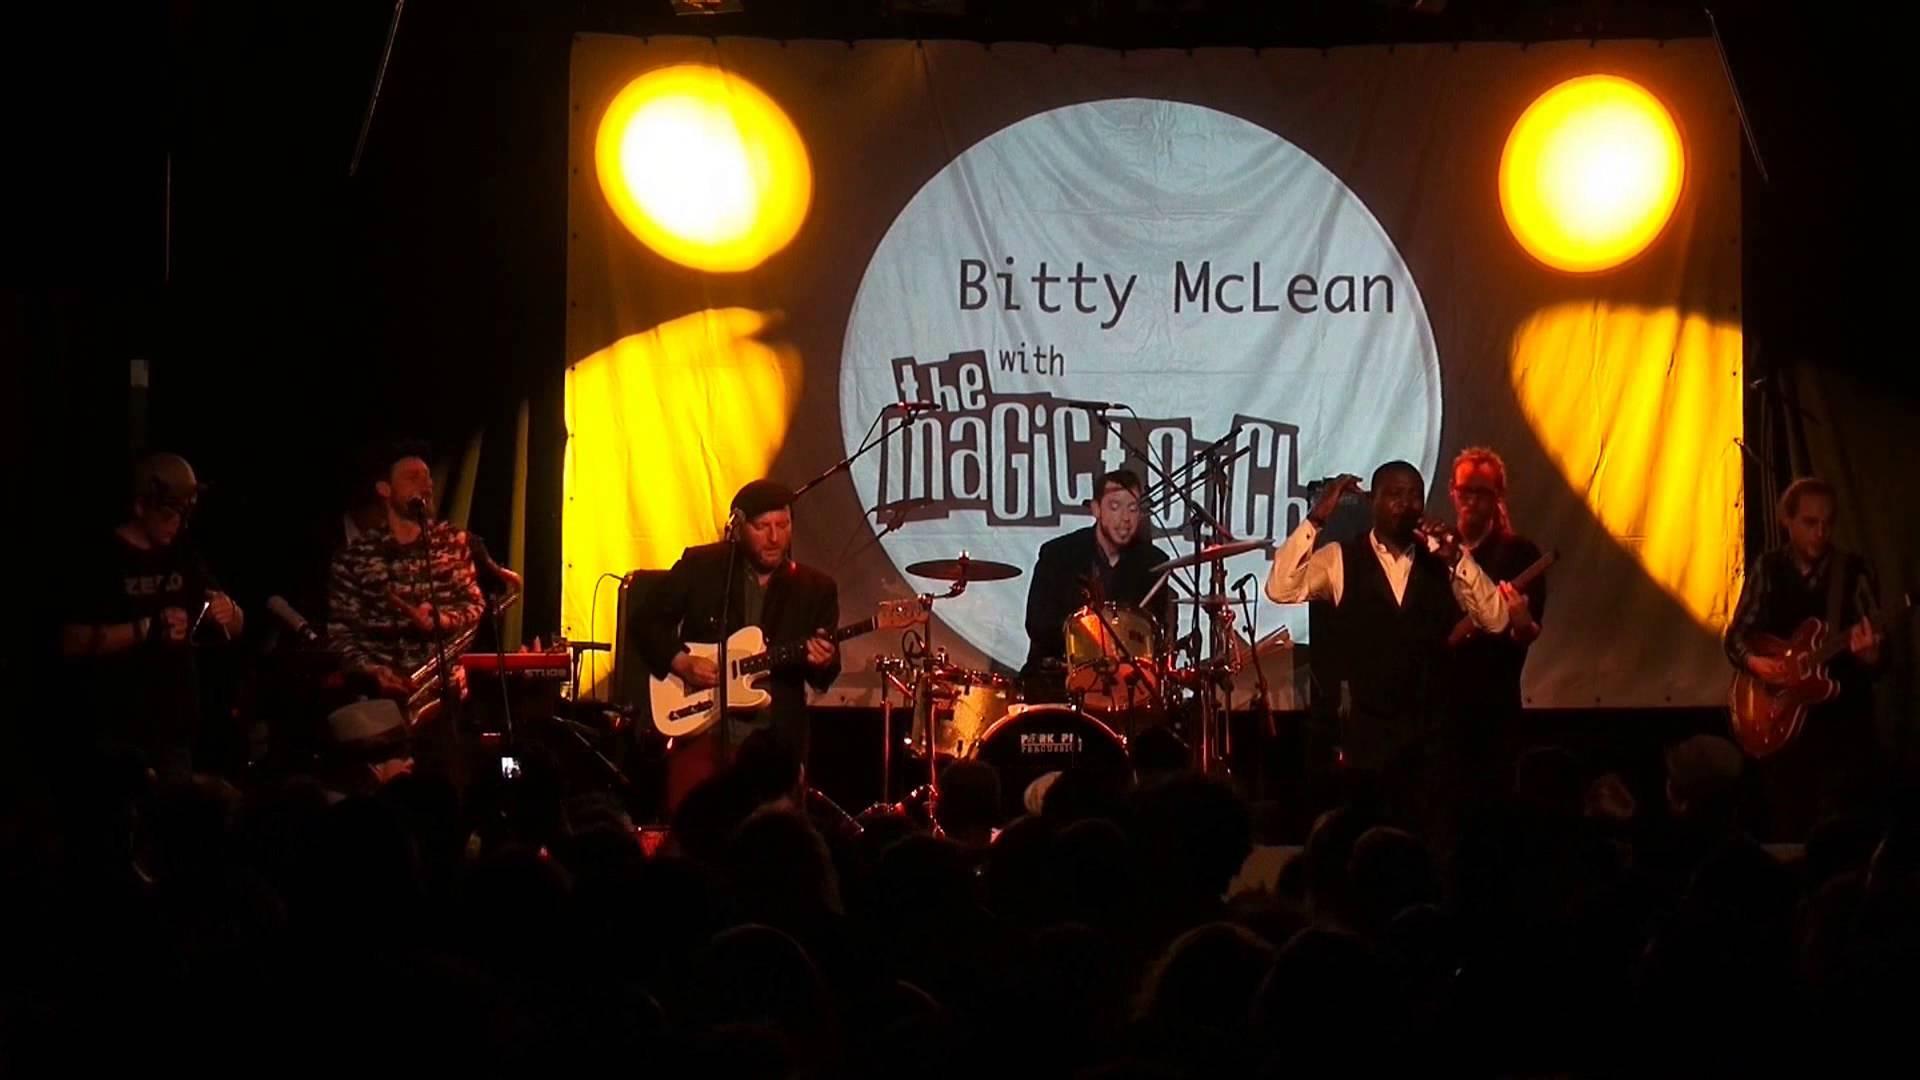 Bitty McLean & The Magic Touch - To Fall In Love in Cologne, Germany @ Freedom Sounds Festival 2015 [4/24/2015]